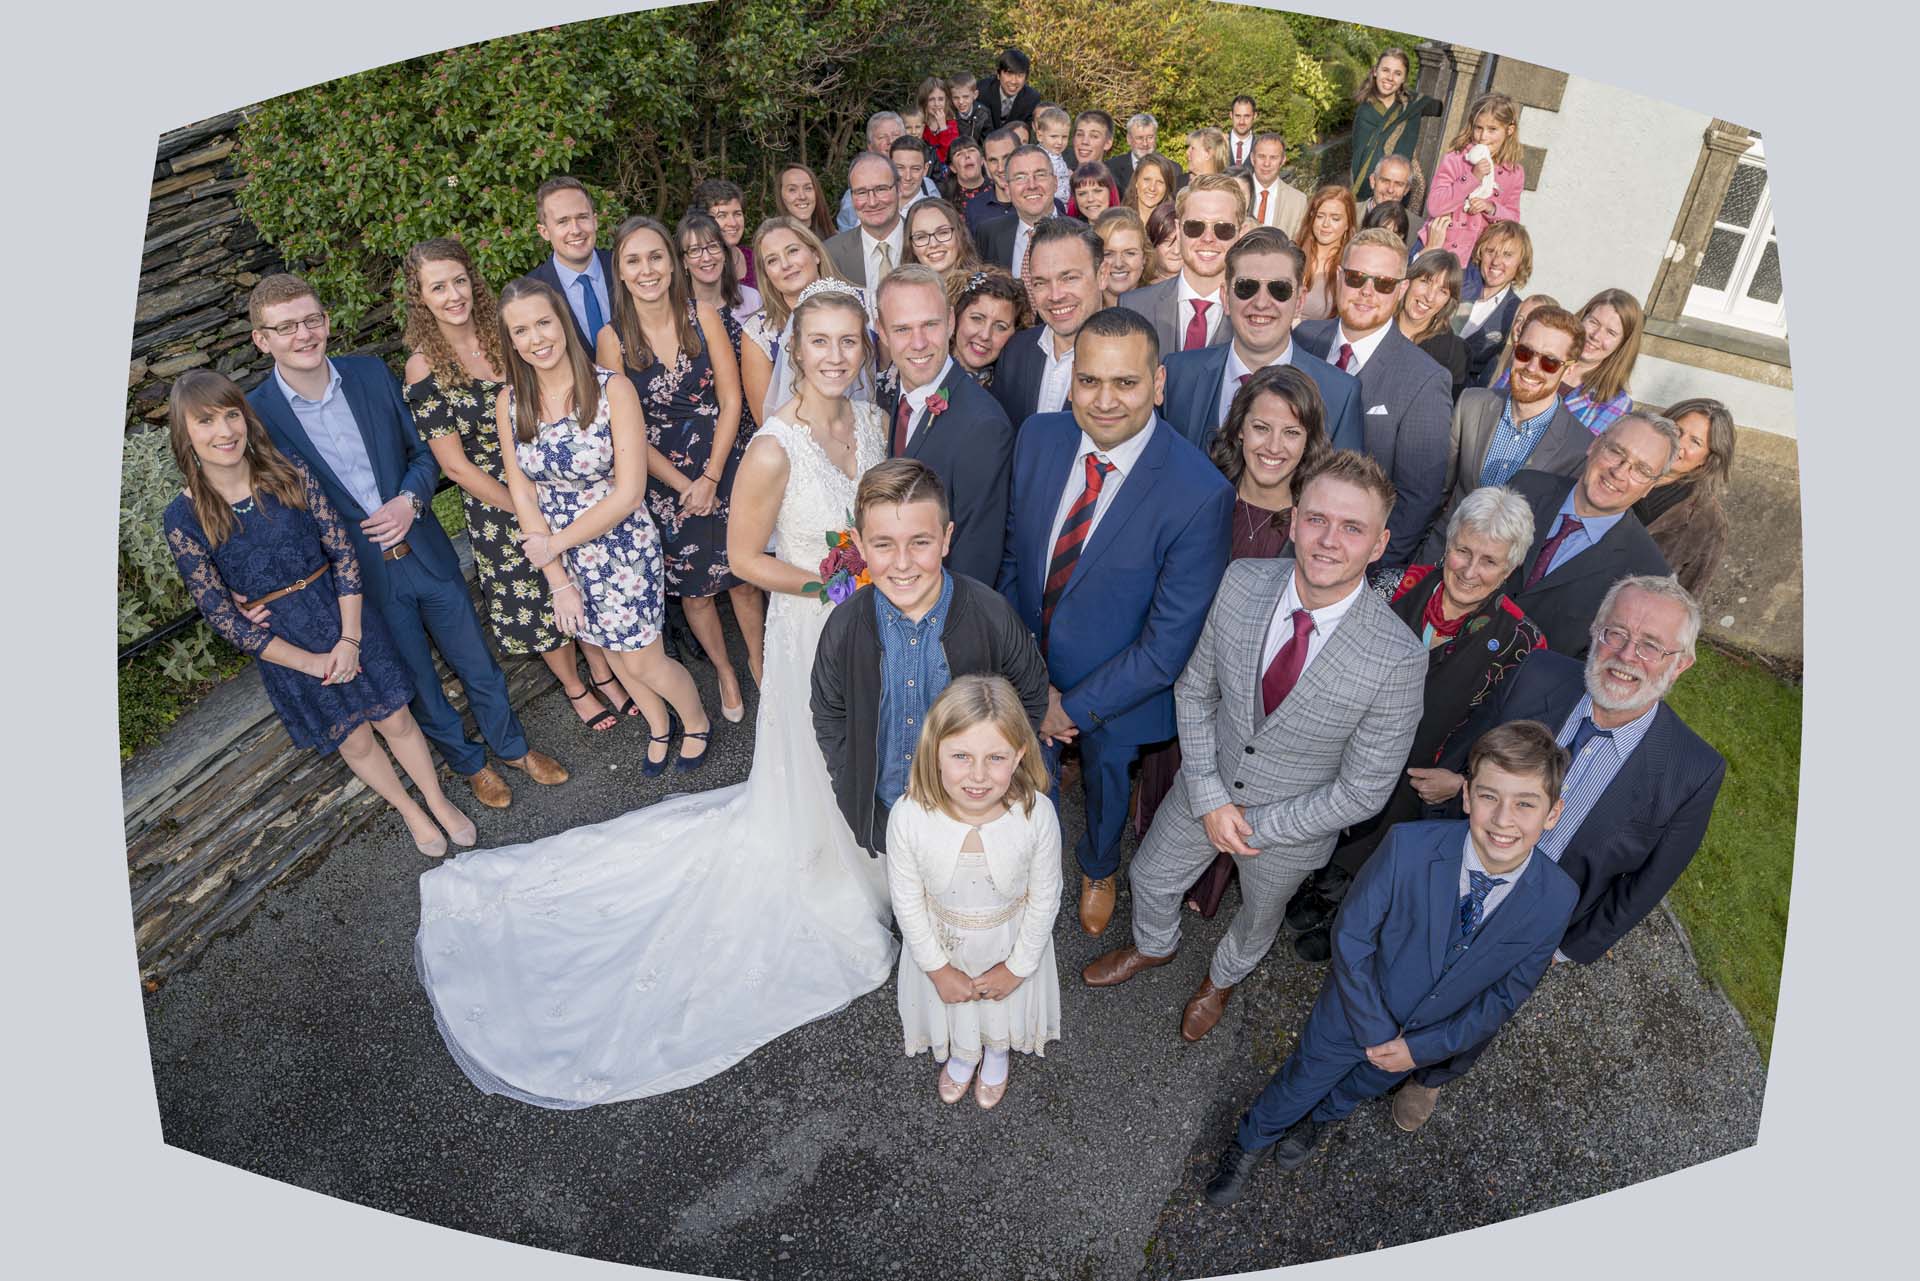 North Wales wedding article on extreme wide angle lenses